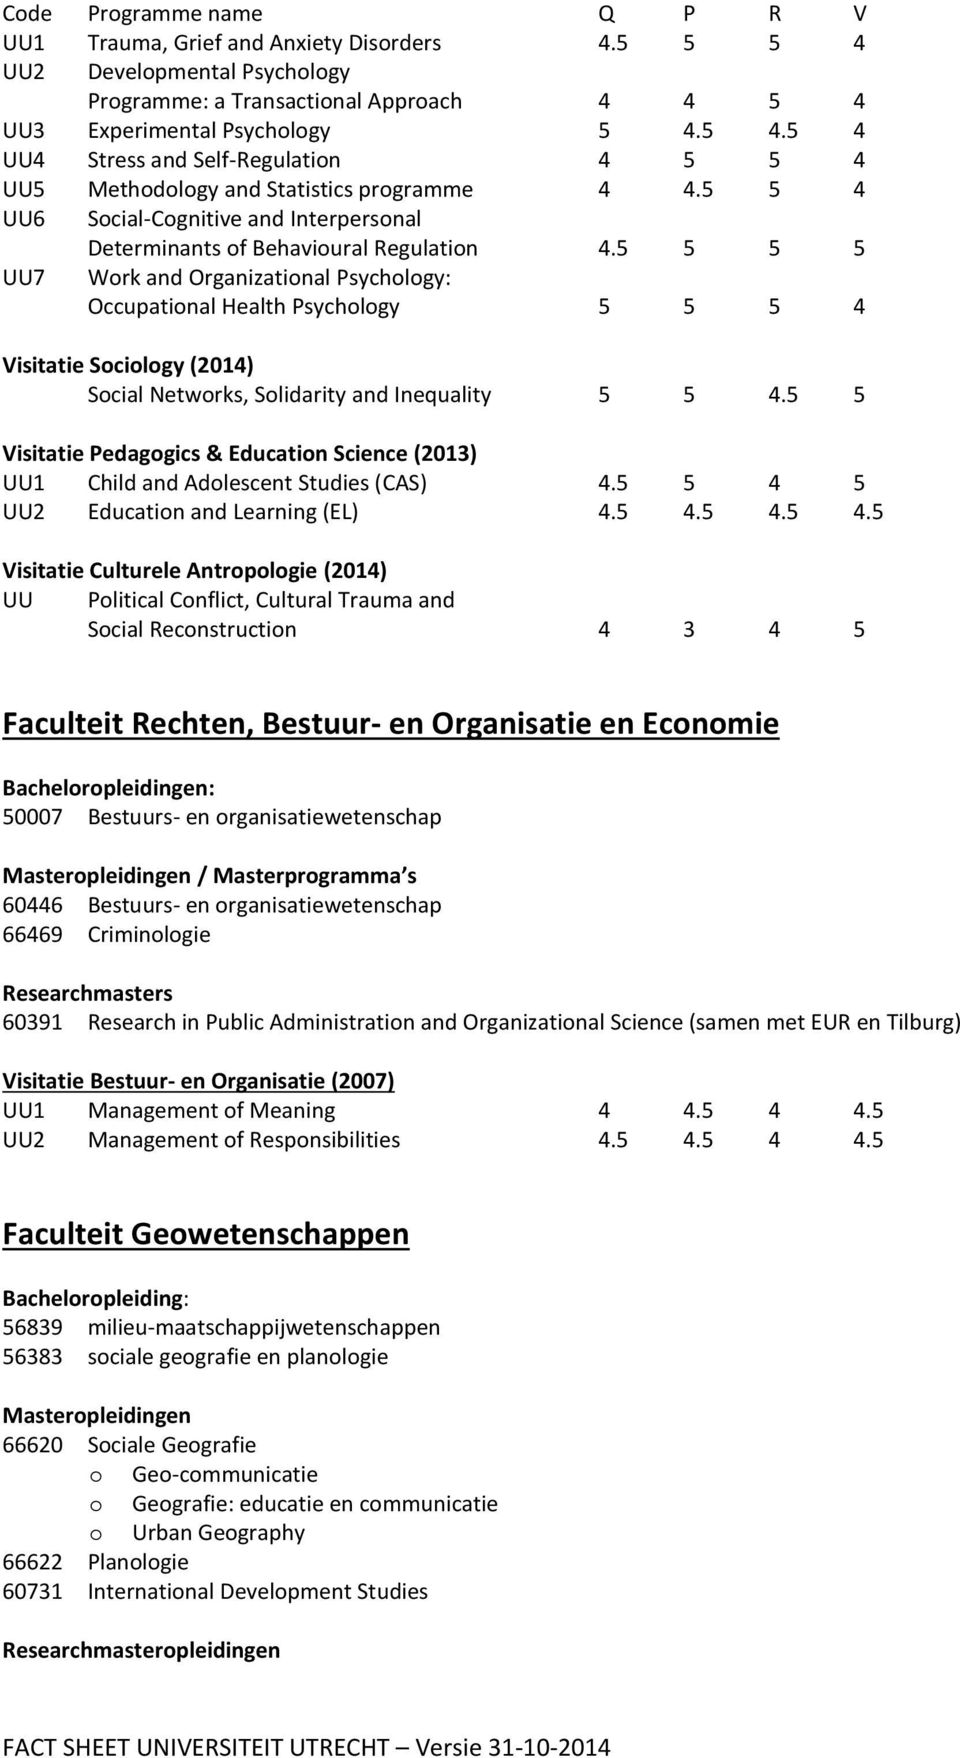 5 5 5 5 UU7 Work and Organizational Psychology: Occupational Health Psychology 5 5 5 4 Visitatie Sociology (2014) Social Networks, Solidarity and Inequality 5 5 4.